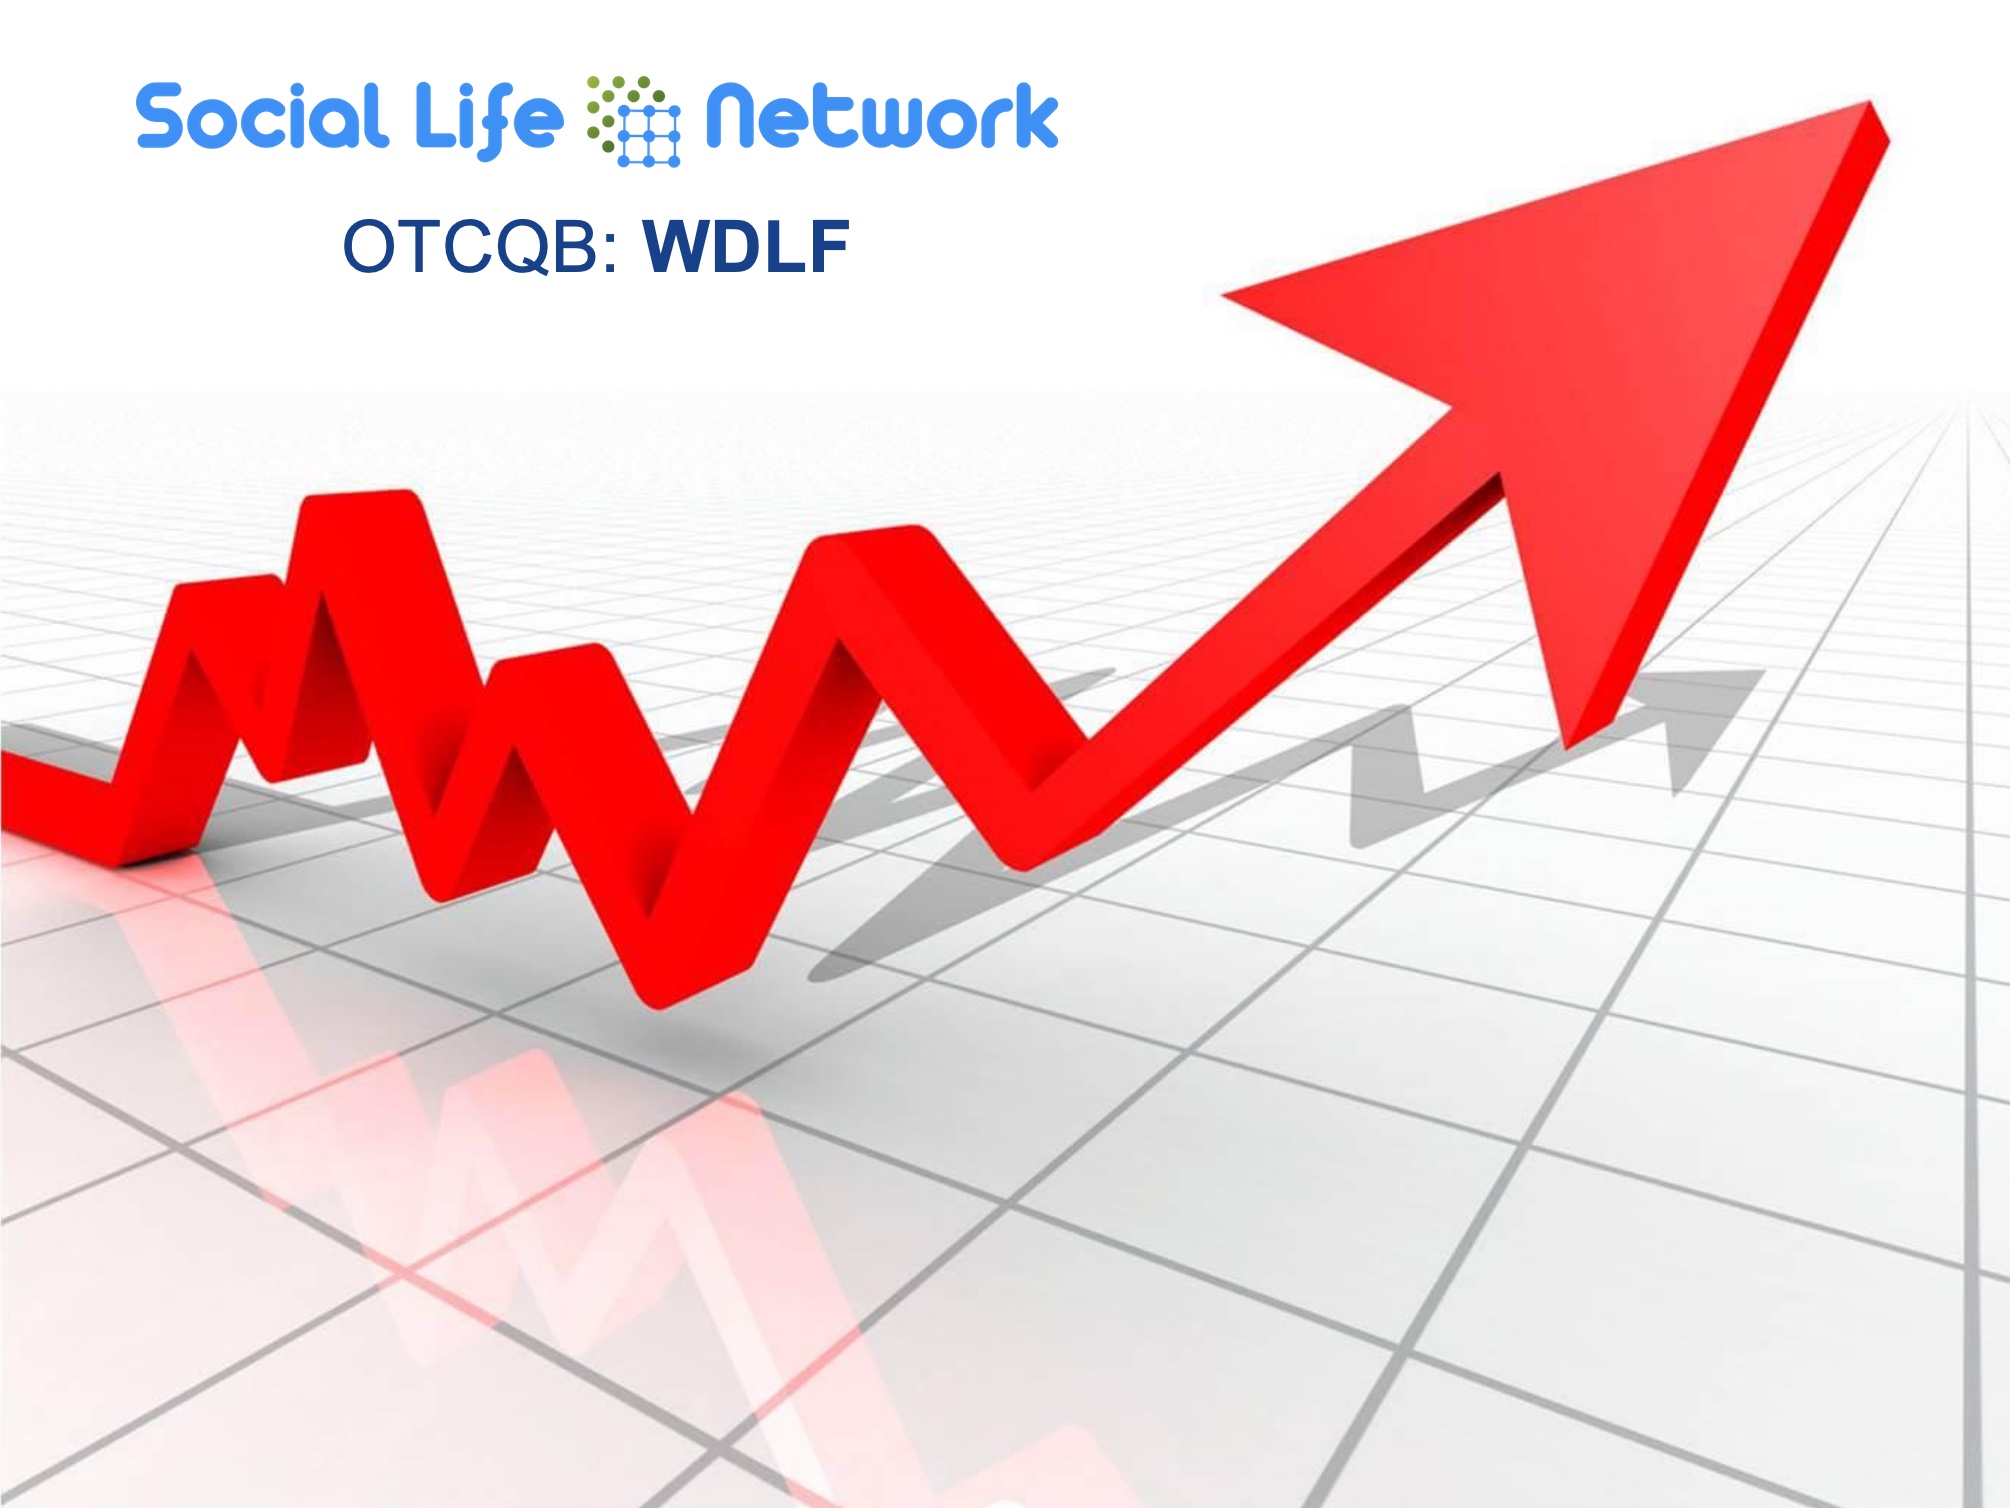 Social Life Network to Host March 28, 2019 Shareholder Call for 10-K and Q2 News Announcements